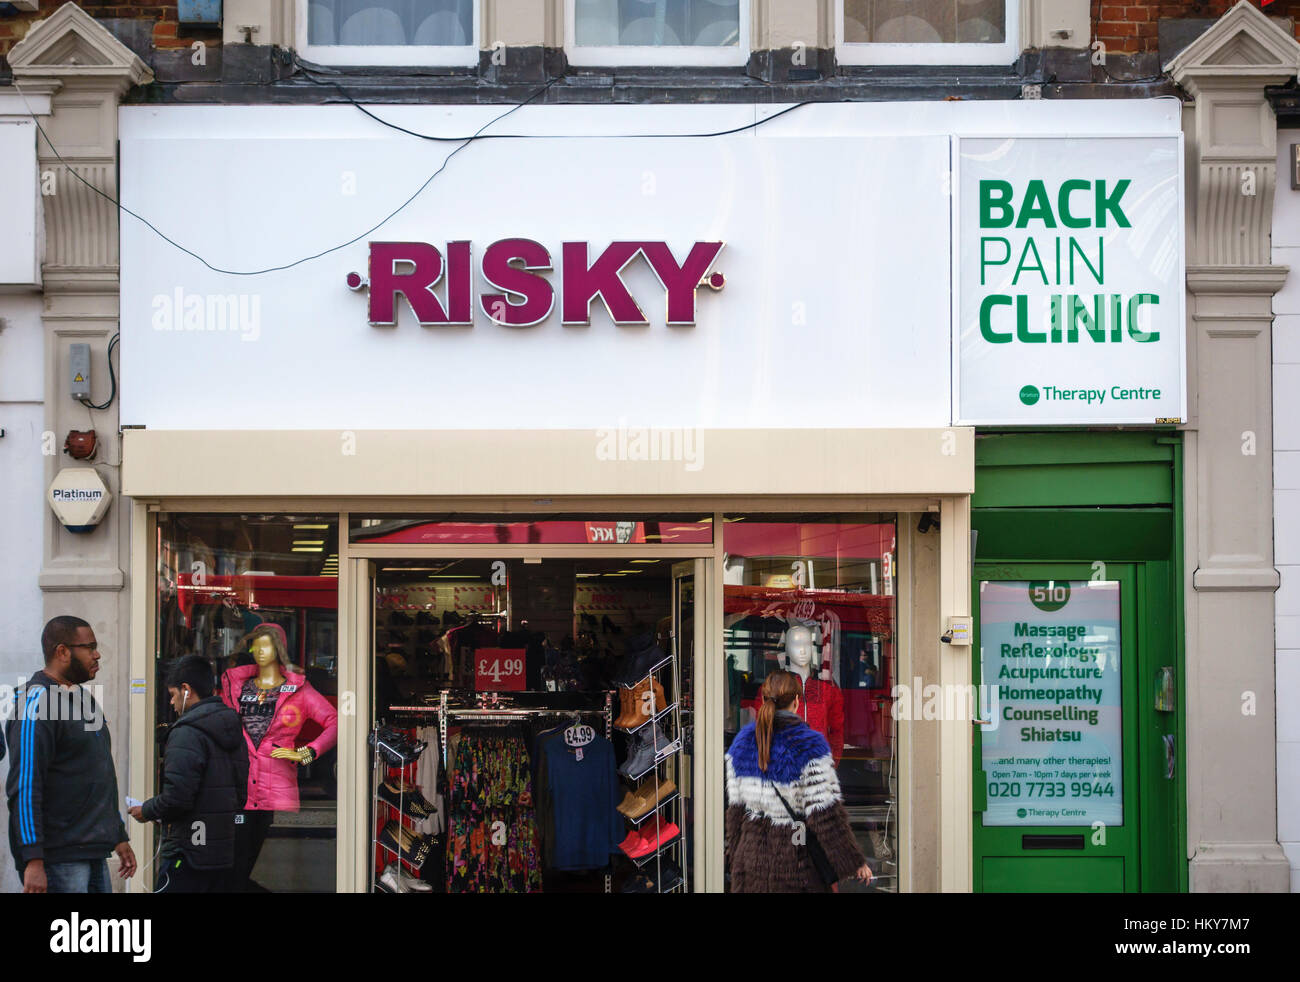 Two shops in a south London street with misleading or confusing signs - 'risky back pain clinic' Stock Photo